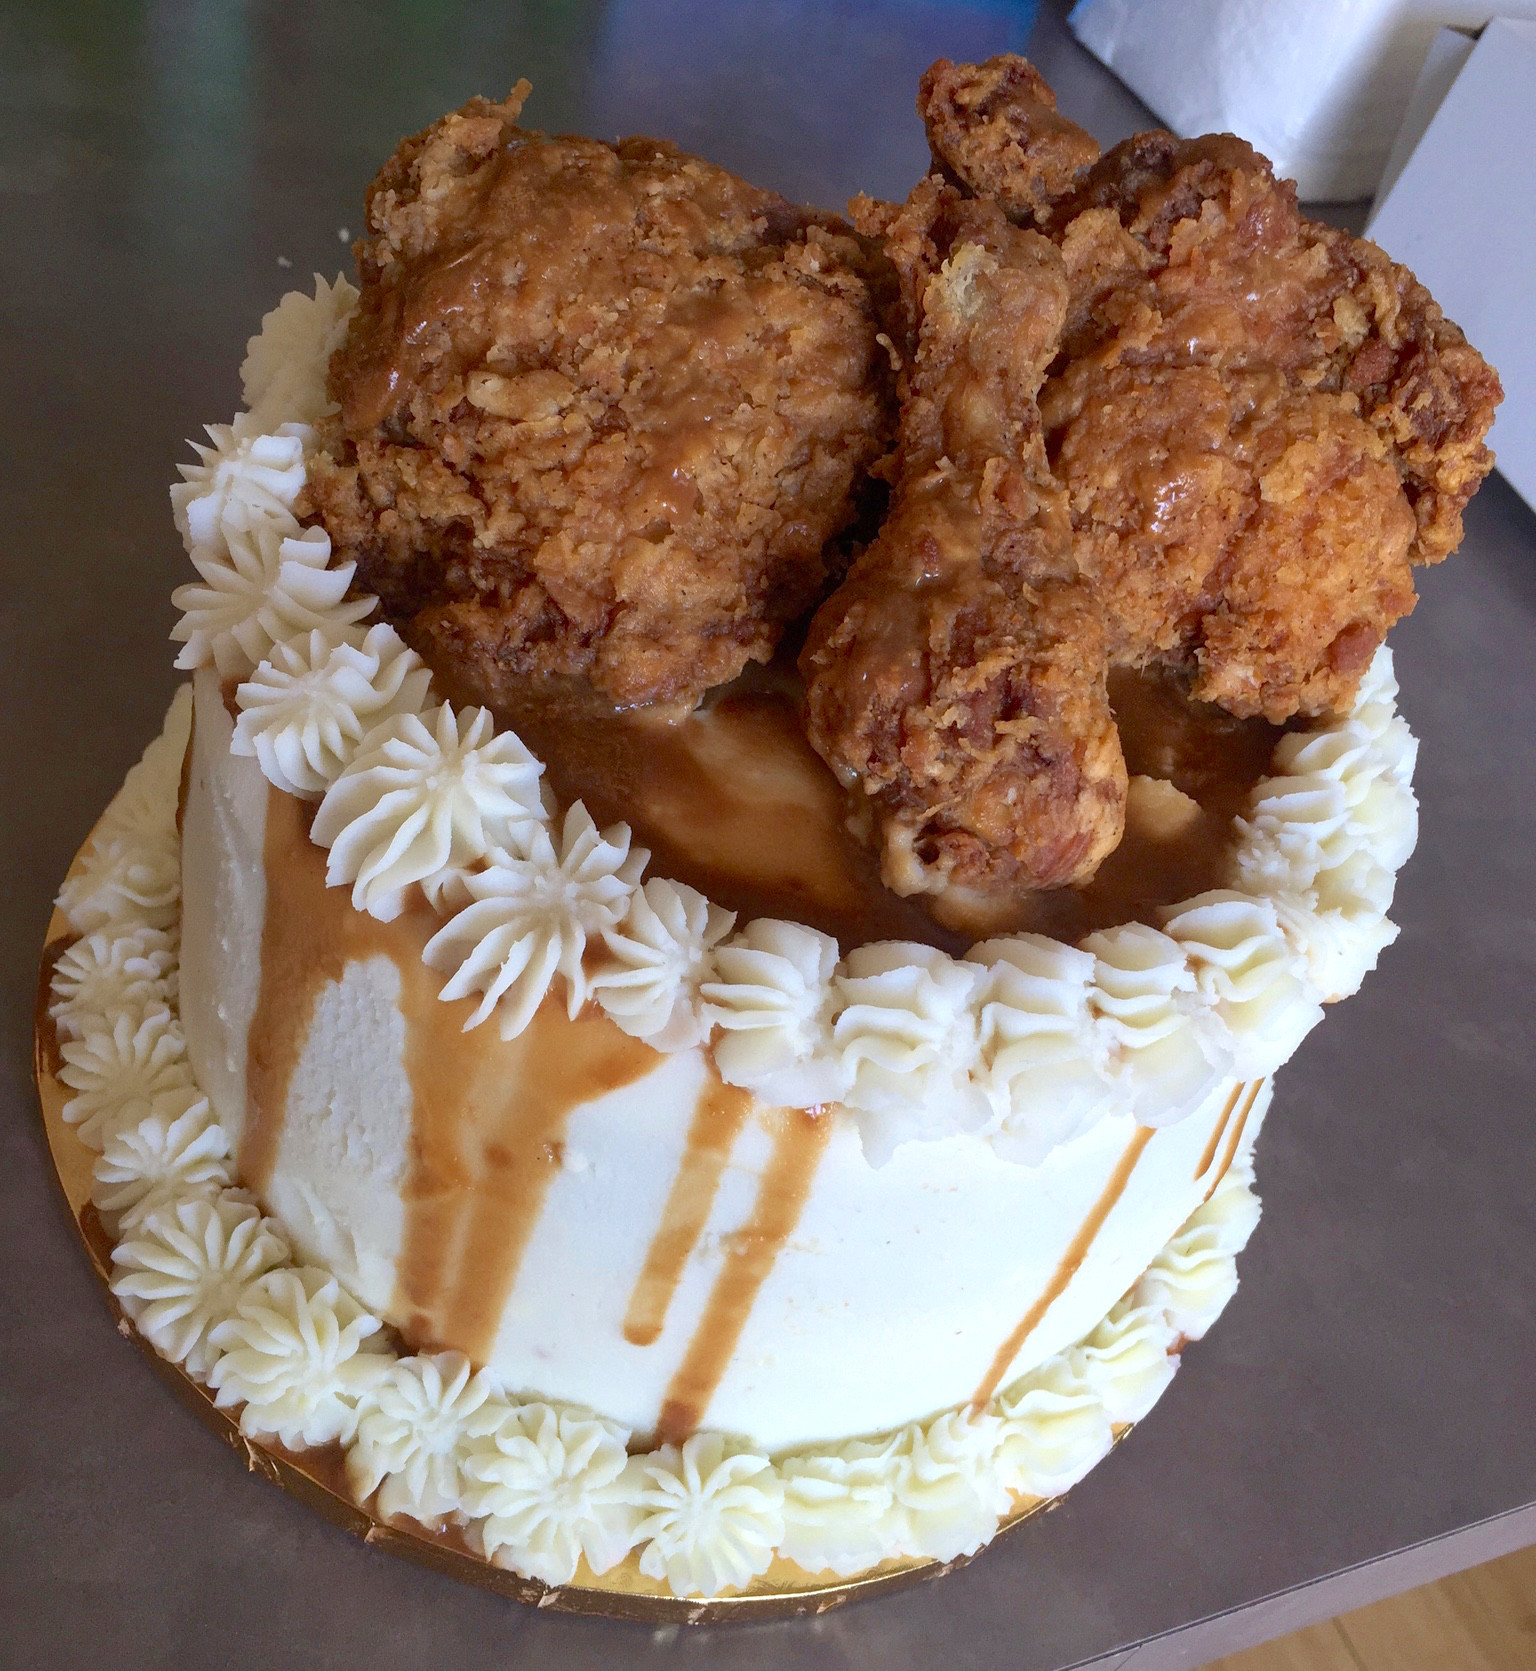 Fried Mashed Potato Cakes
 This fried chicken mashed potato cake is a dinner dream